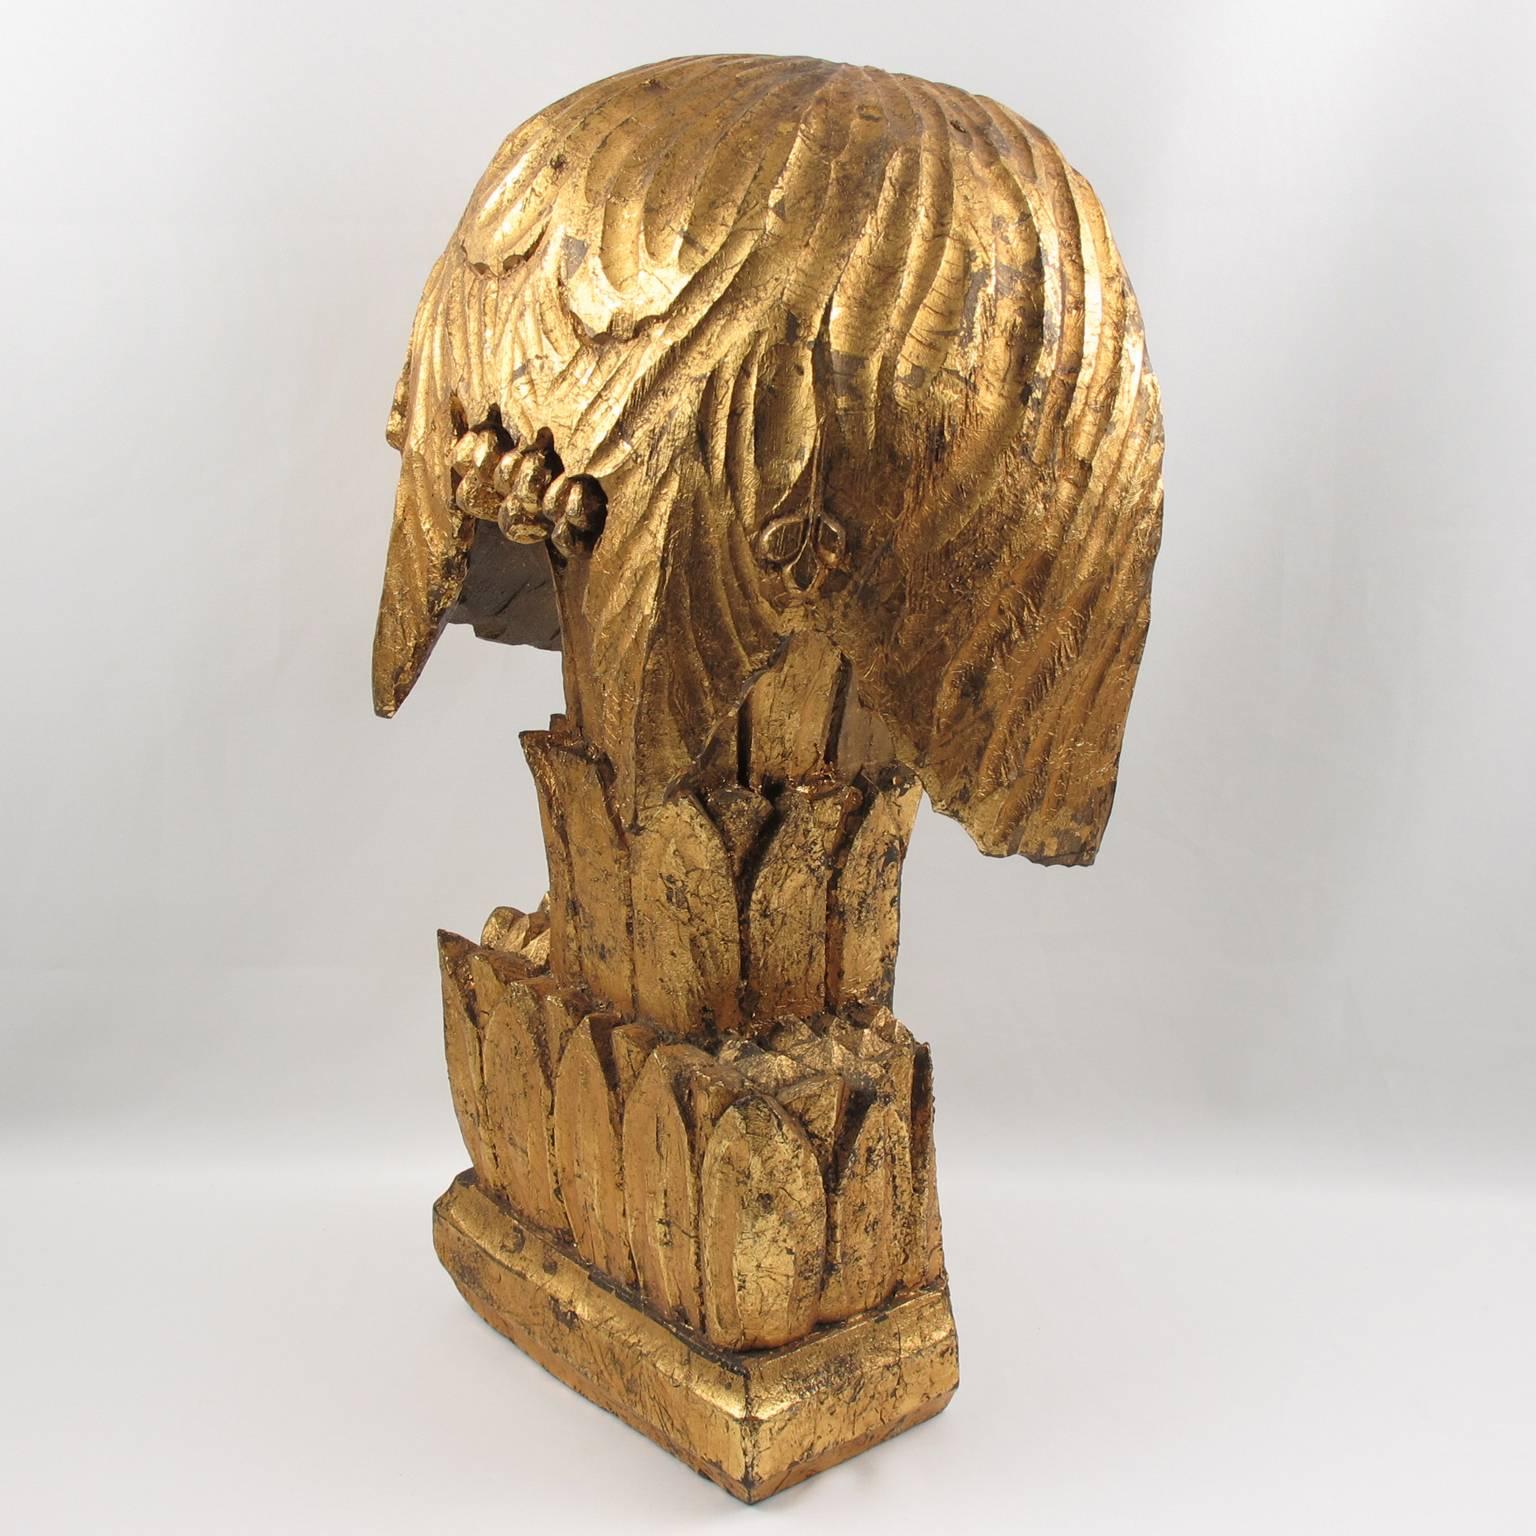 Beautiful gilded wood ornament, France, circa 1920s. Entirely all hand-carved heavy wood architectural fragment sculpture with elegant original patina. All covered with 18-karat gold leaf. Interesting design that can be placed standing on shelf or